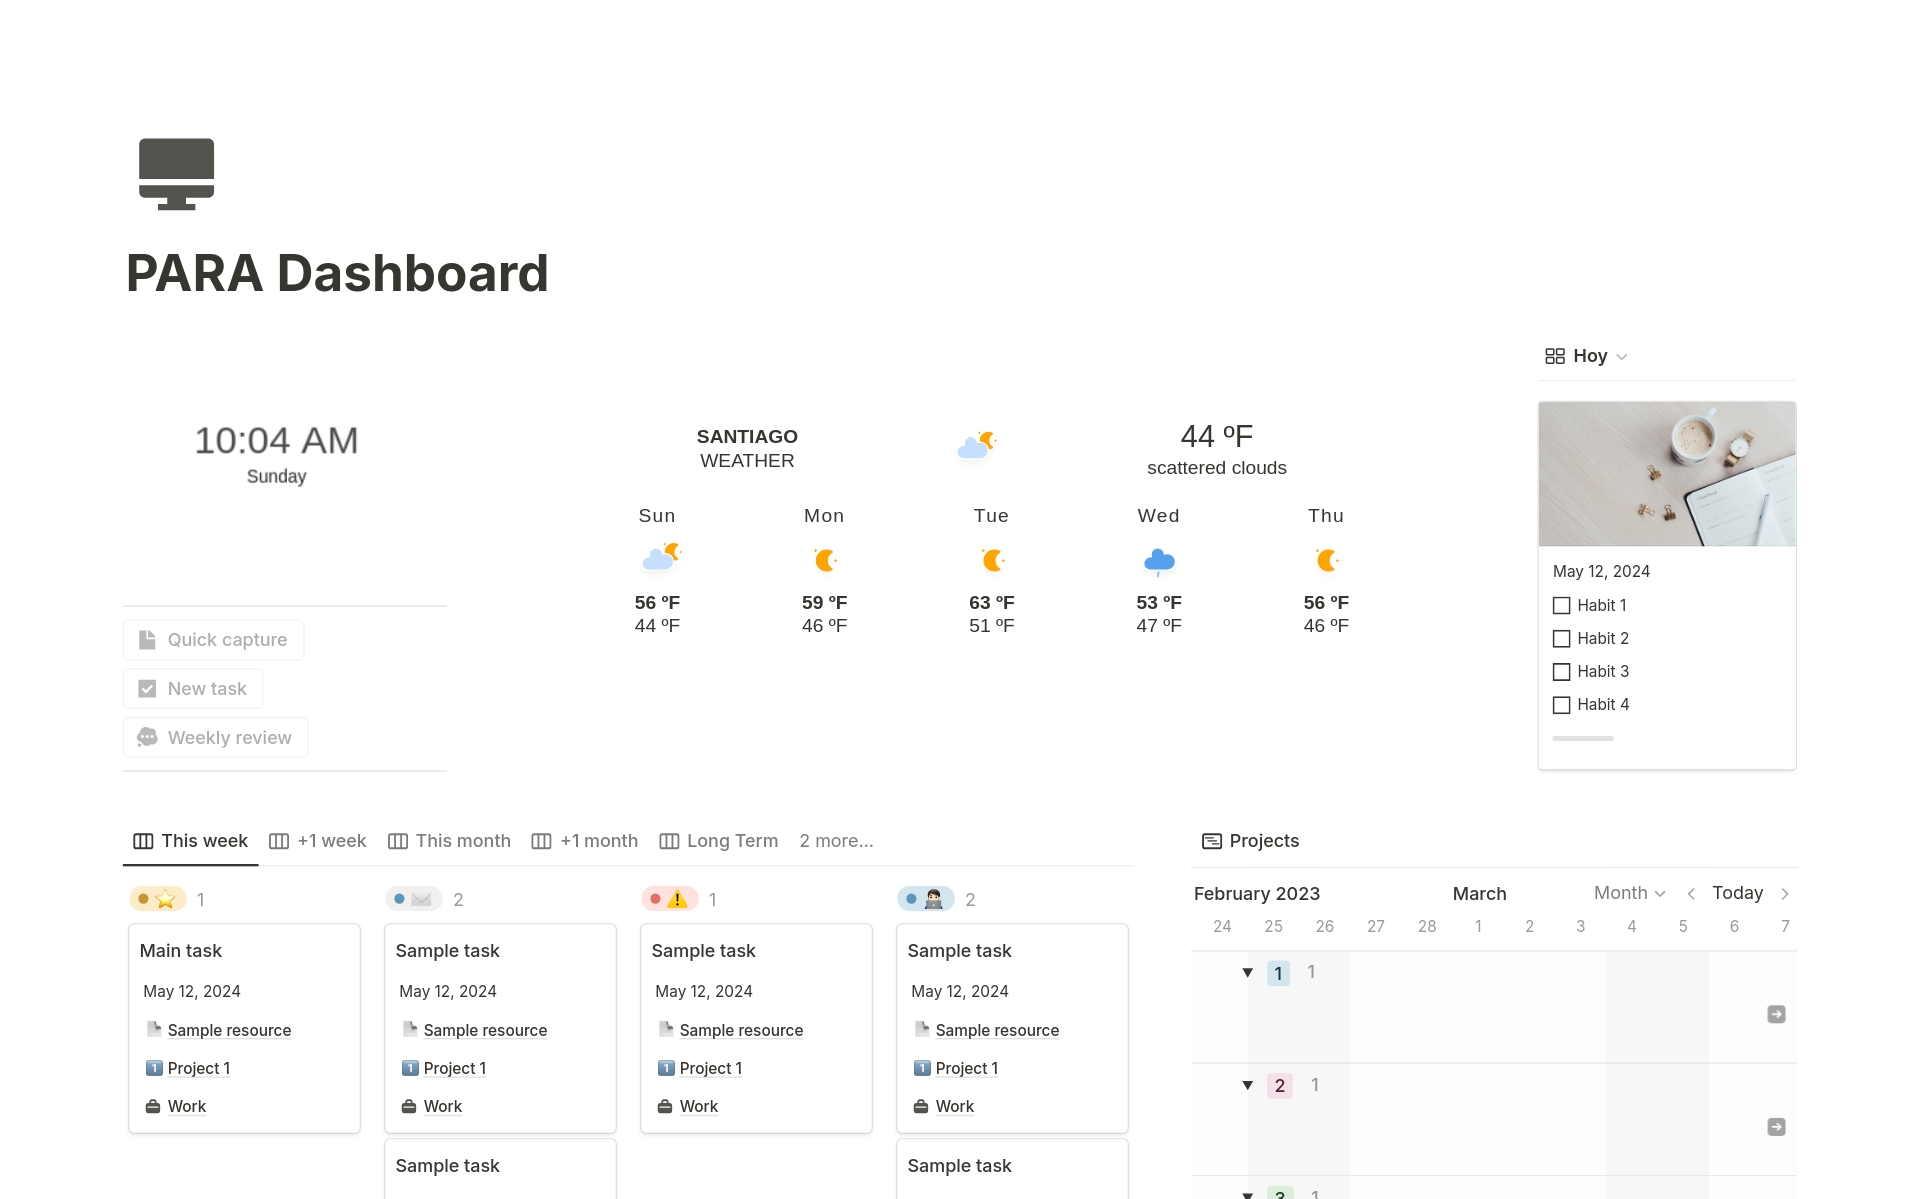 Are you tired of feeling overwhelmed by the constant influx of information and tasks in your personal and professional life?
Do you struggle to keep track of your projects, habits, and goals?

The PARA Dashboard is here to revolutionize your productivity and organization.